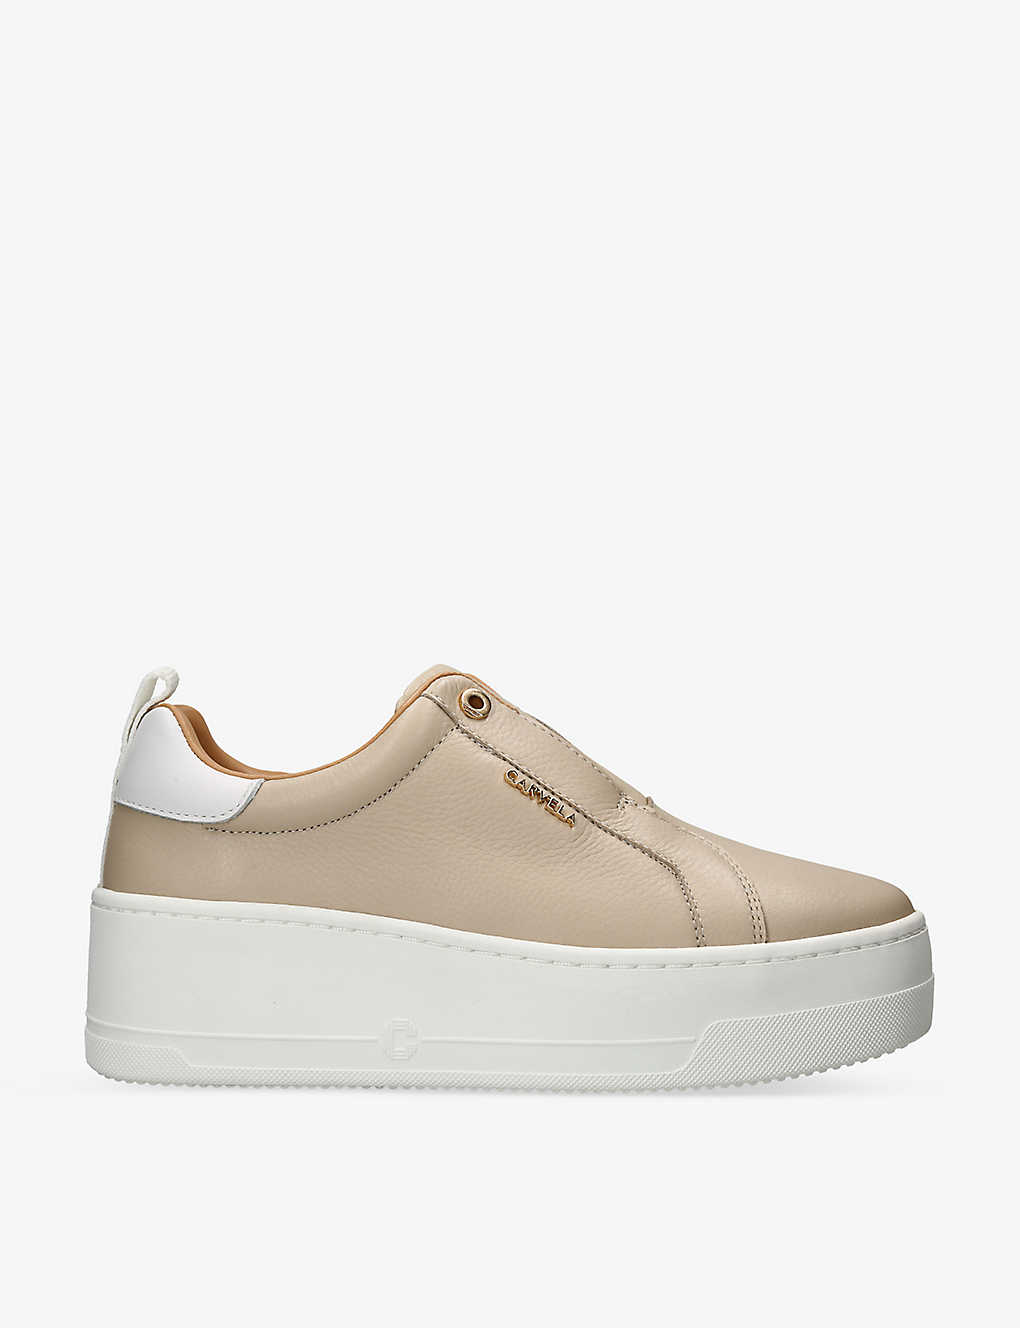 Carvela Womens Taupe Connected Laceless Platform Leather Trainers